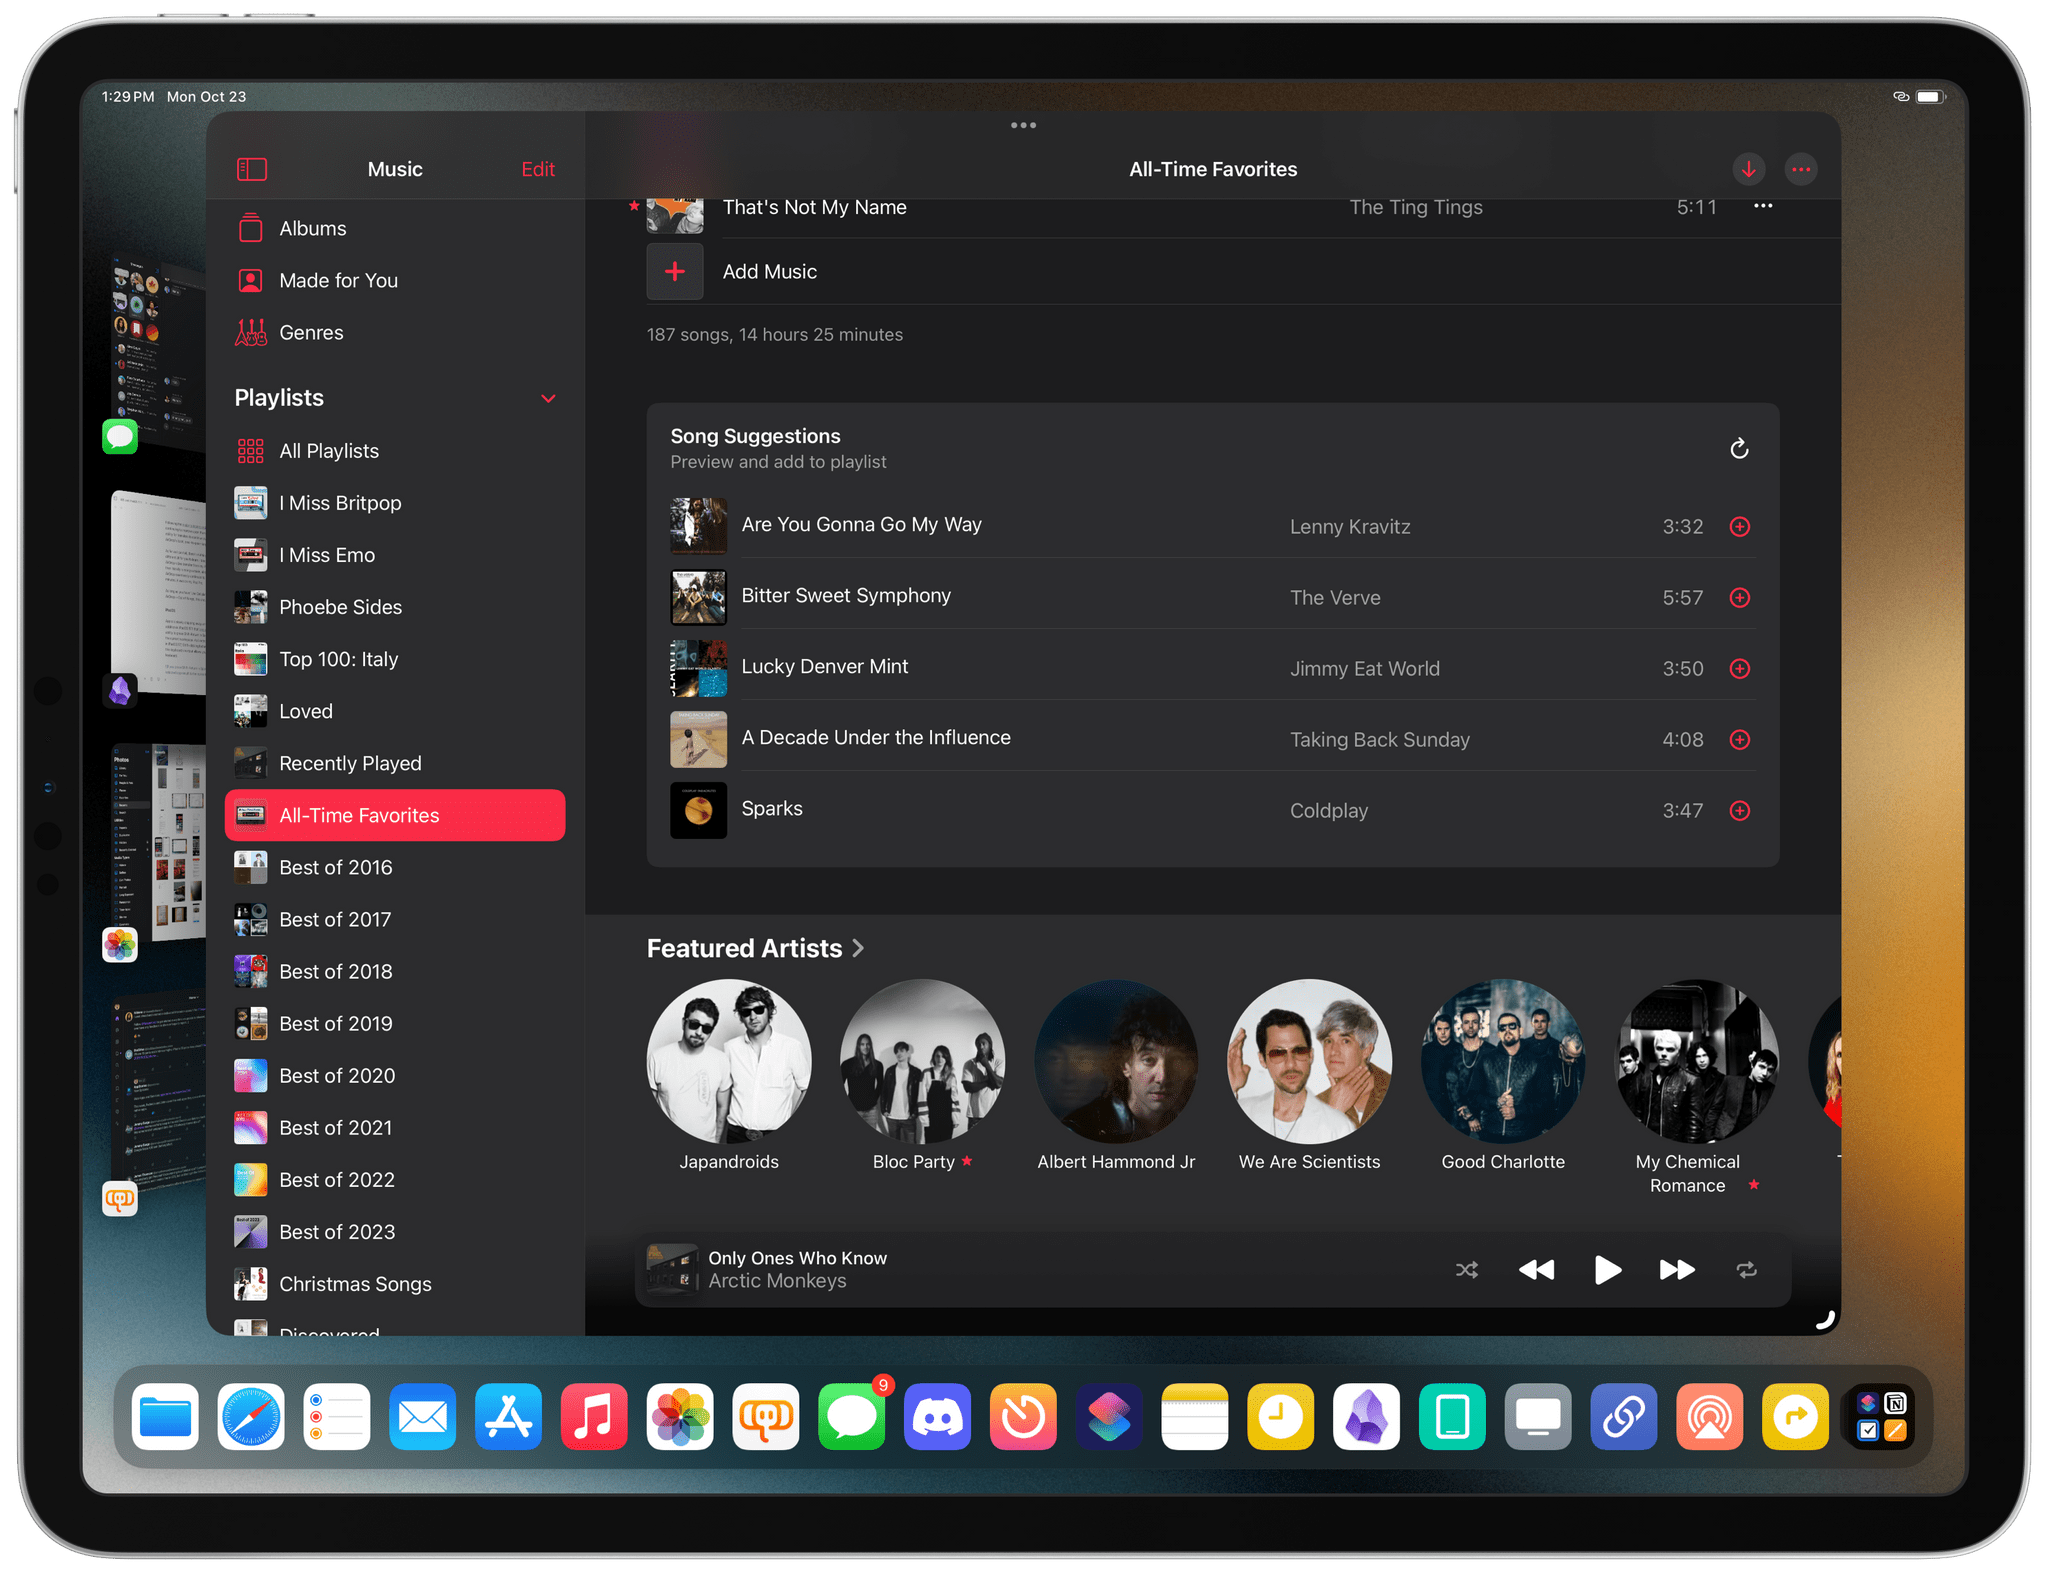 Song suggestions at the bottom of playlists.